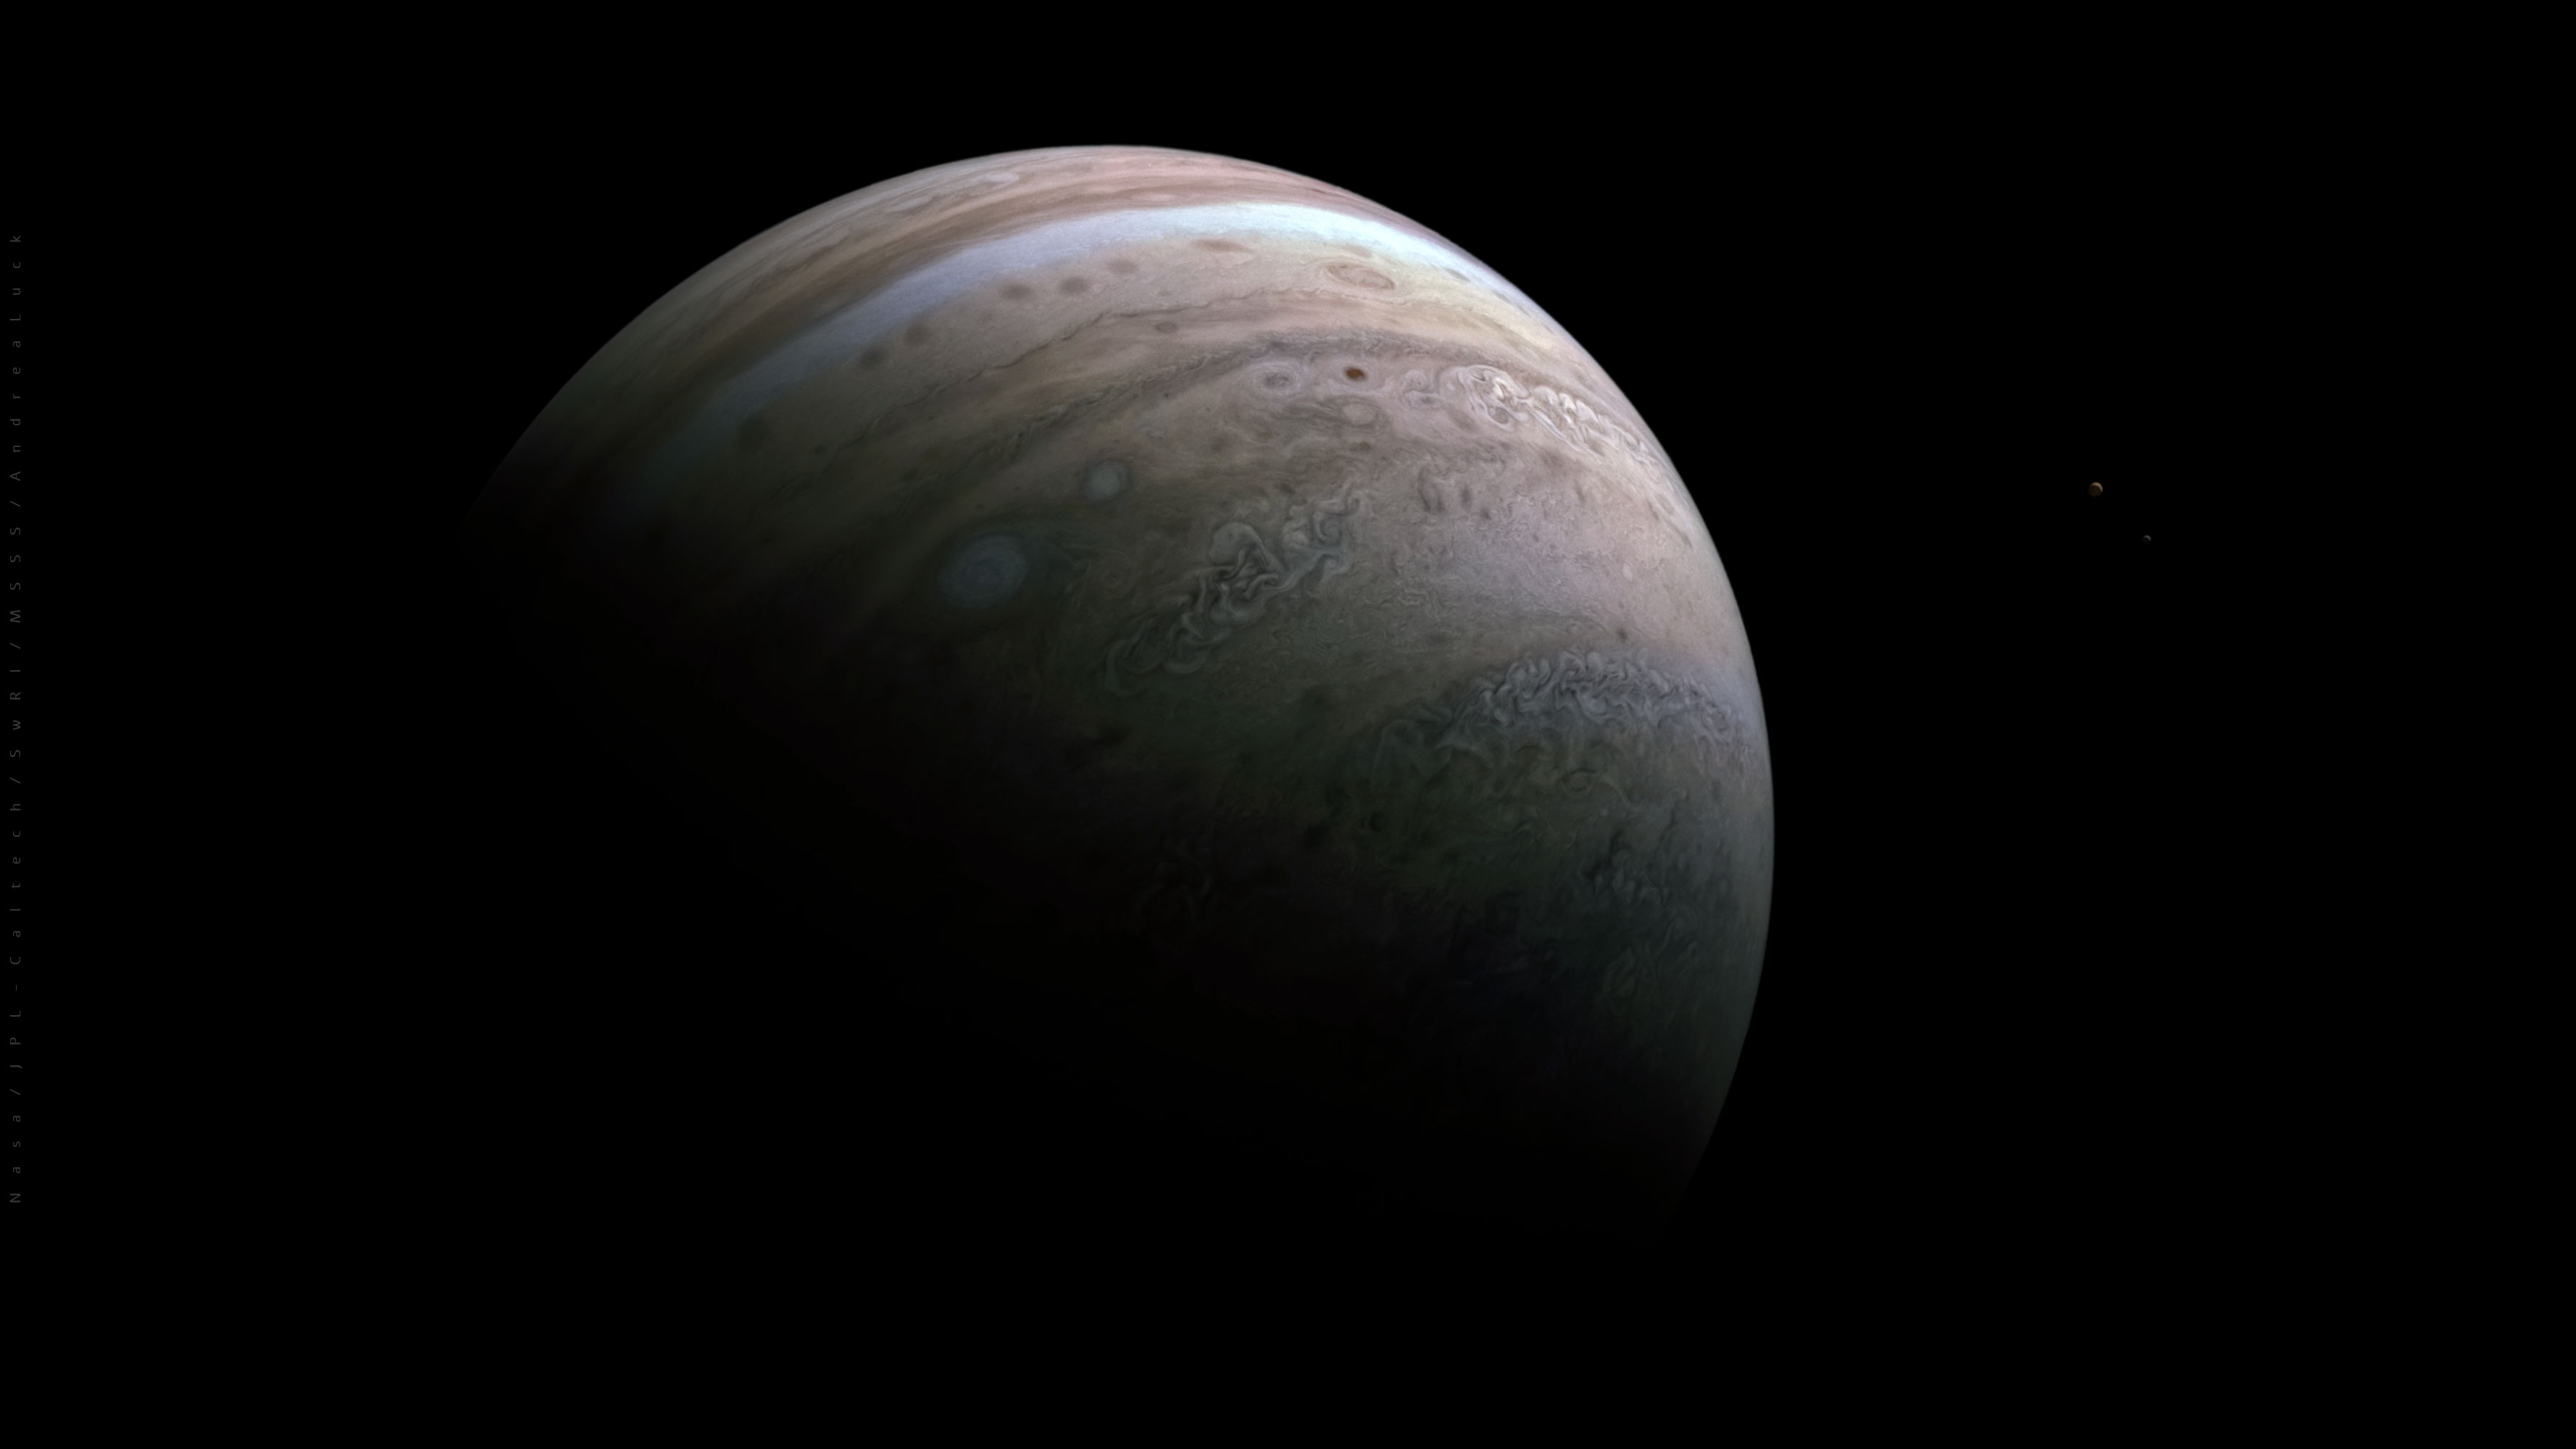 The full view of Jupiter, Io and Europa captured by the Juno spacecraft on Jan. 12, 2022.